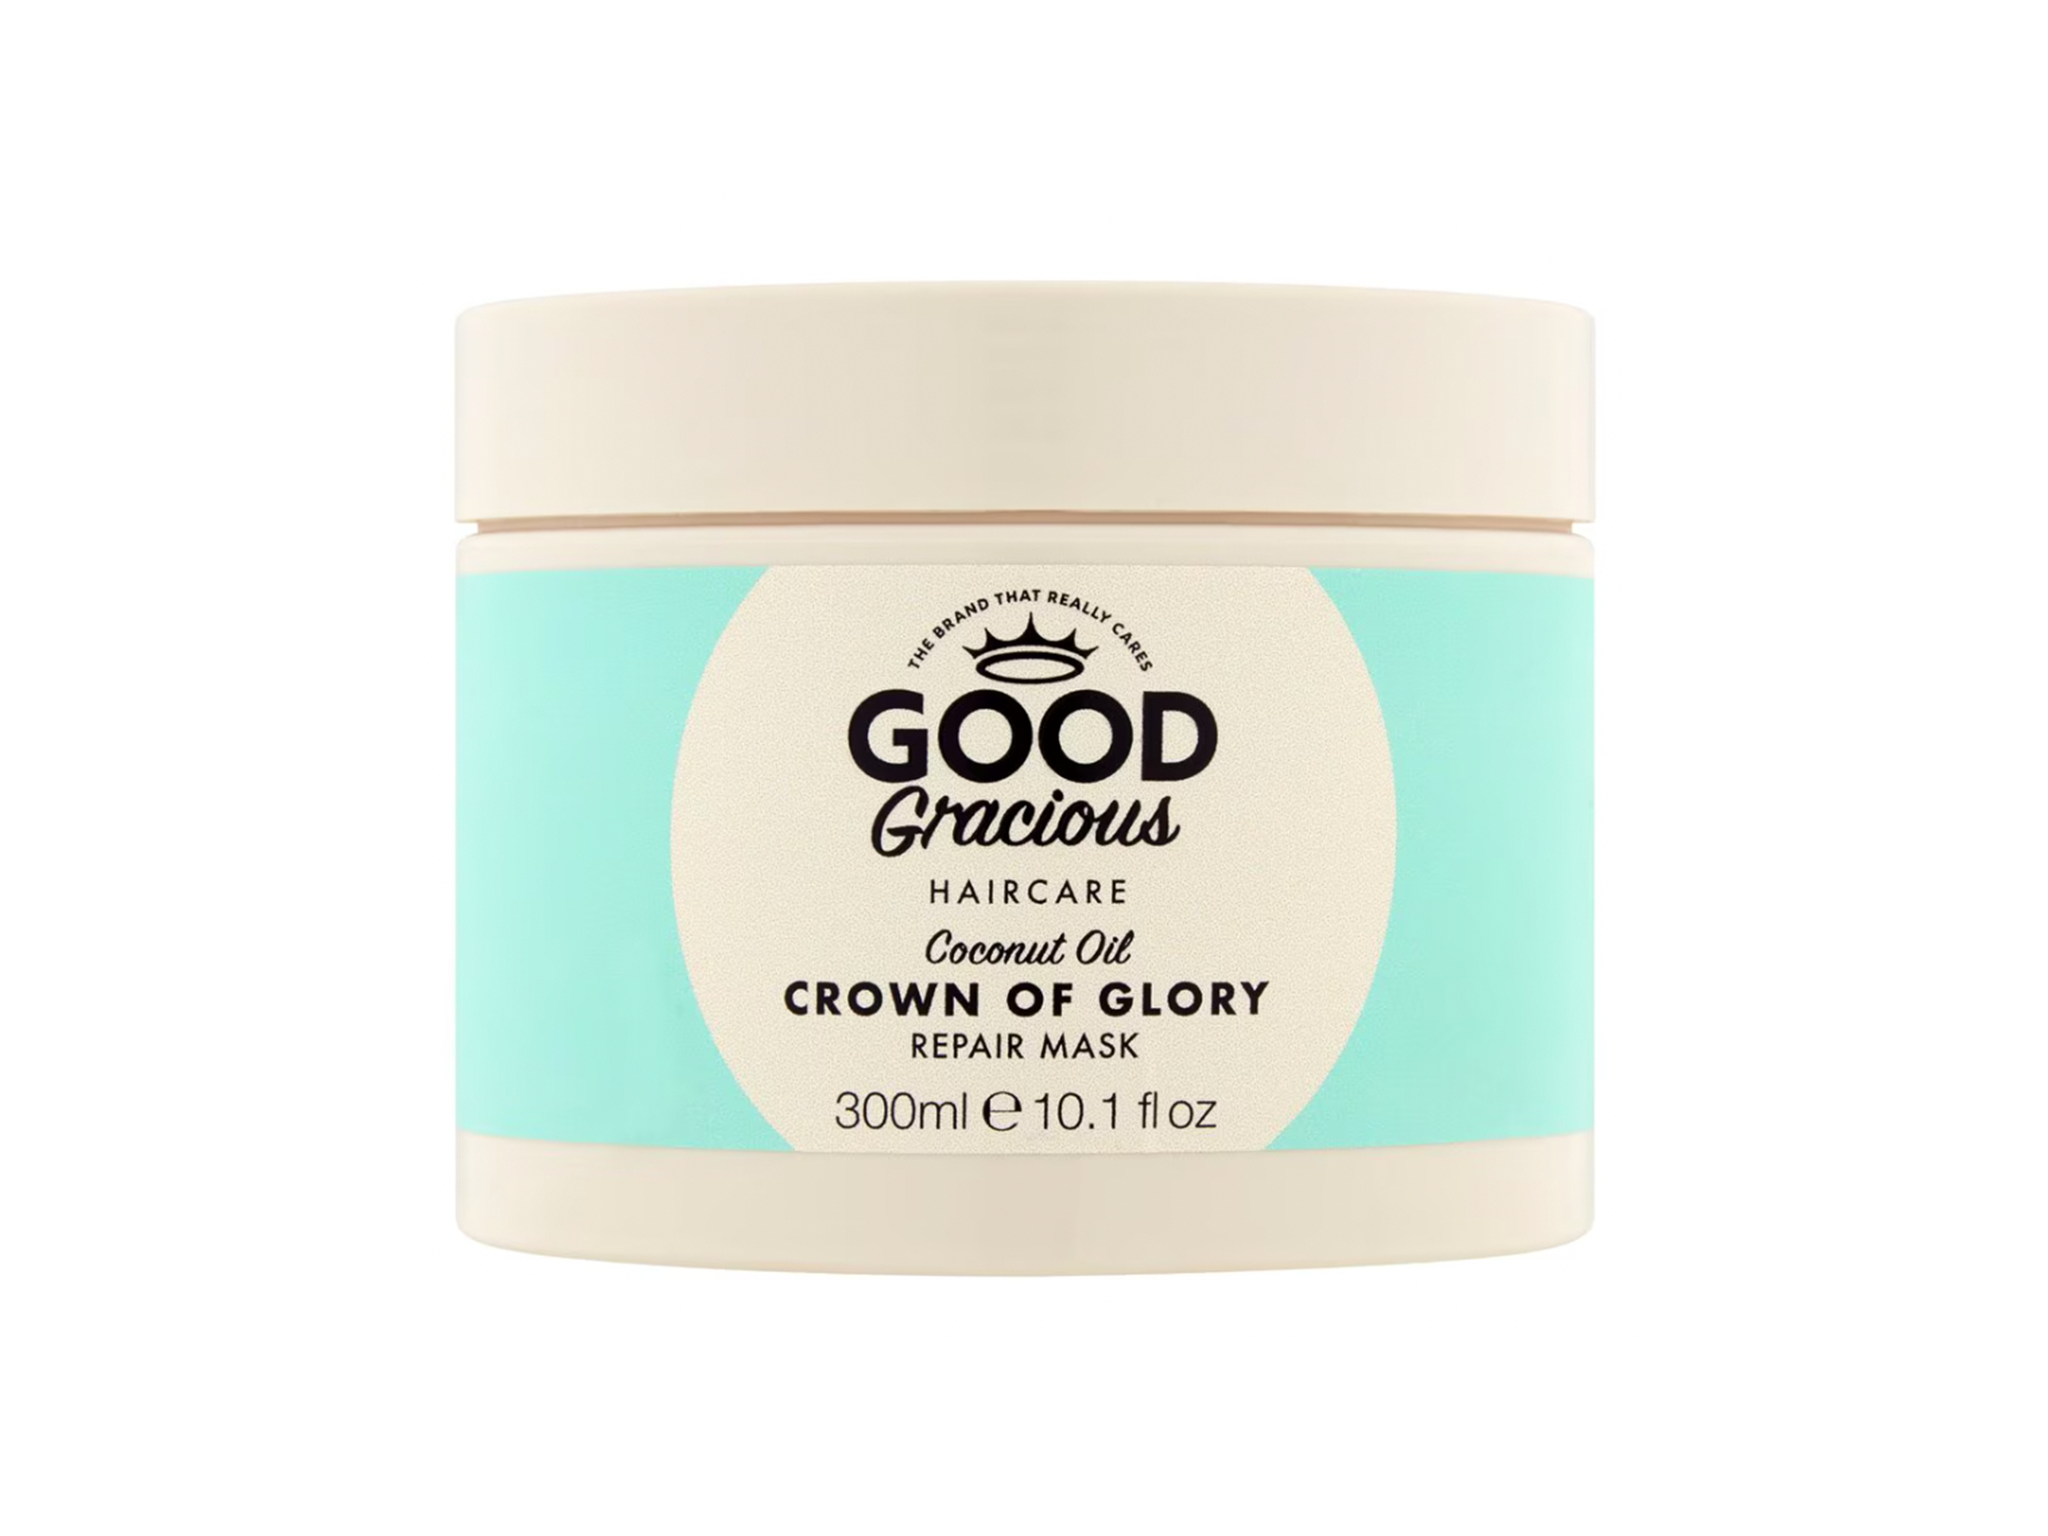 Good Gracious crown of glory coconut oil